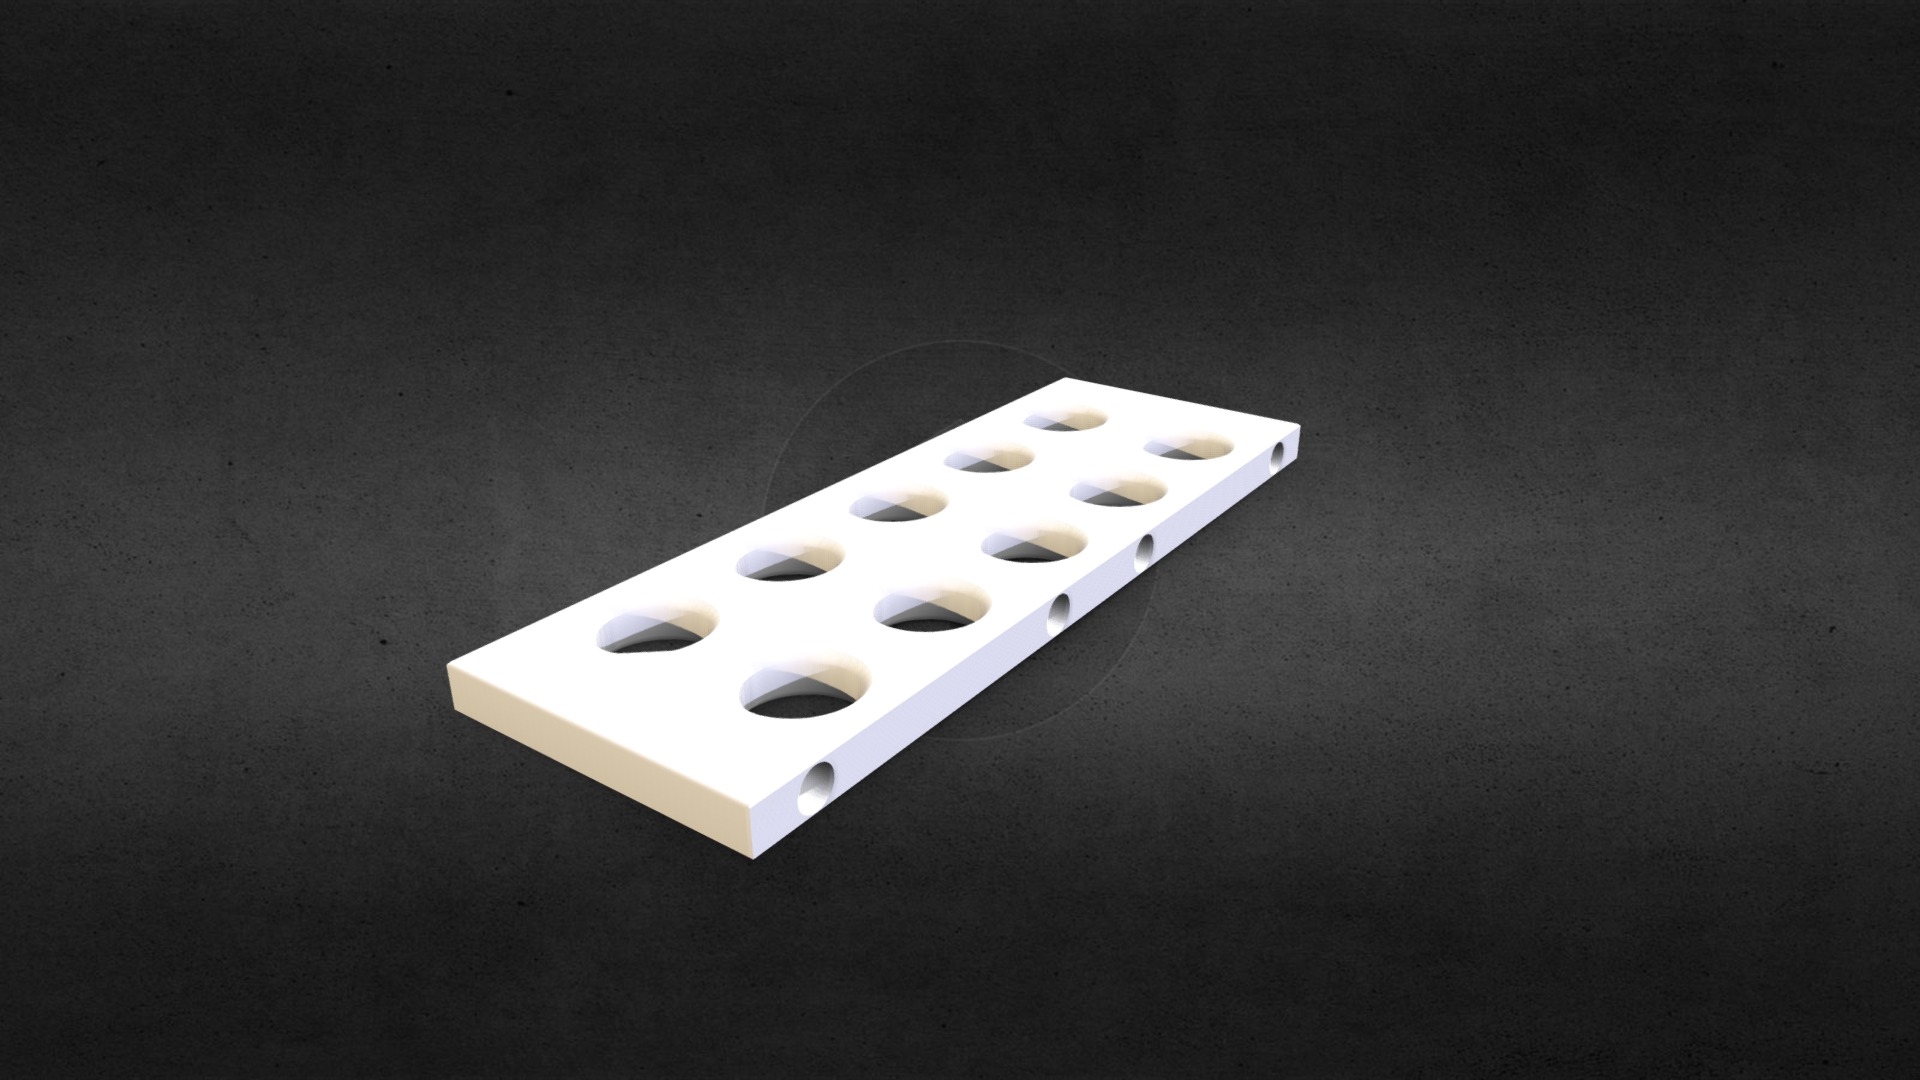 3D model m-board 2 - This is a 3D model of the m-board 2. The 3D model is about a black and white photo of a car tire.